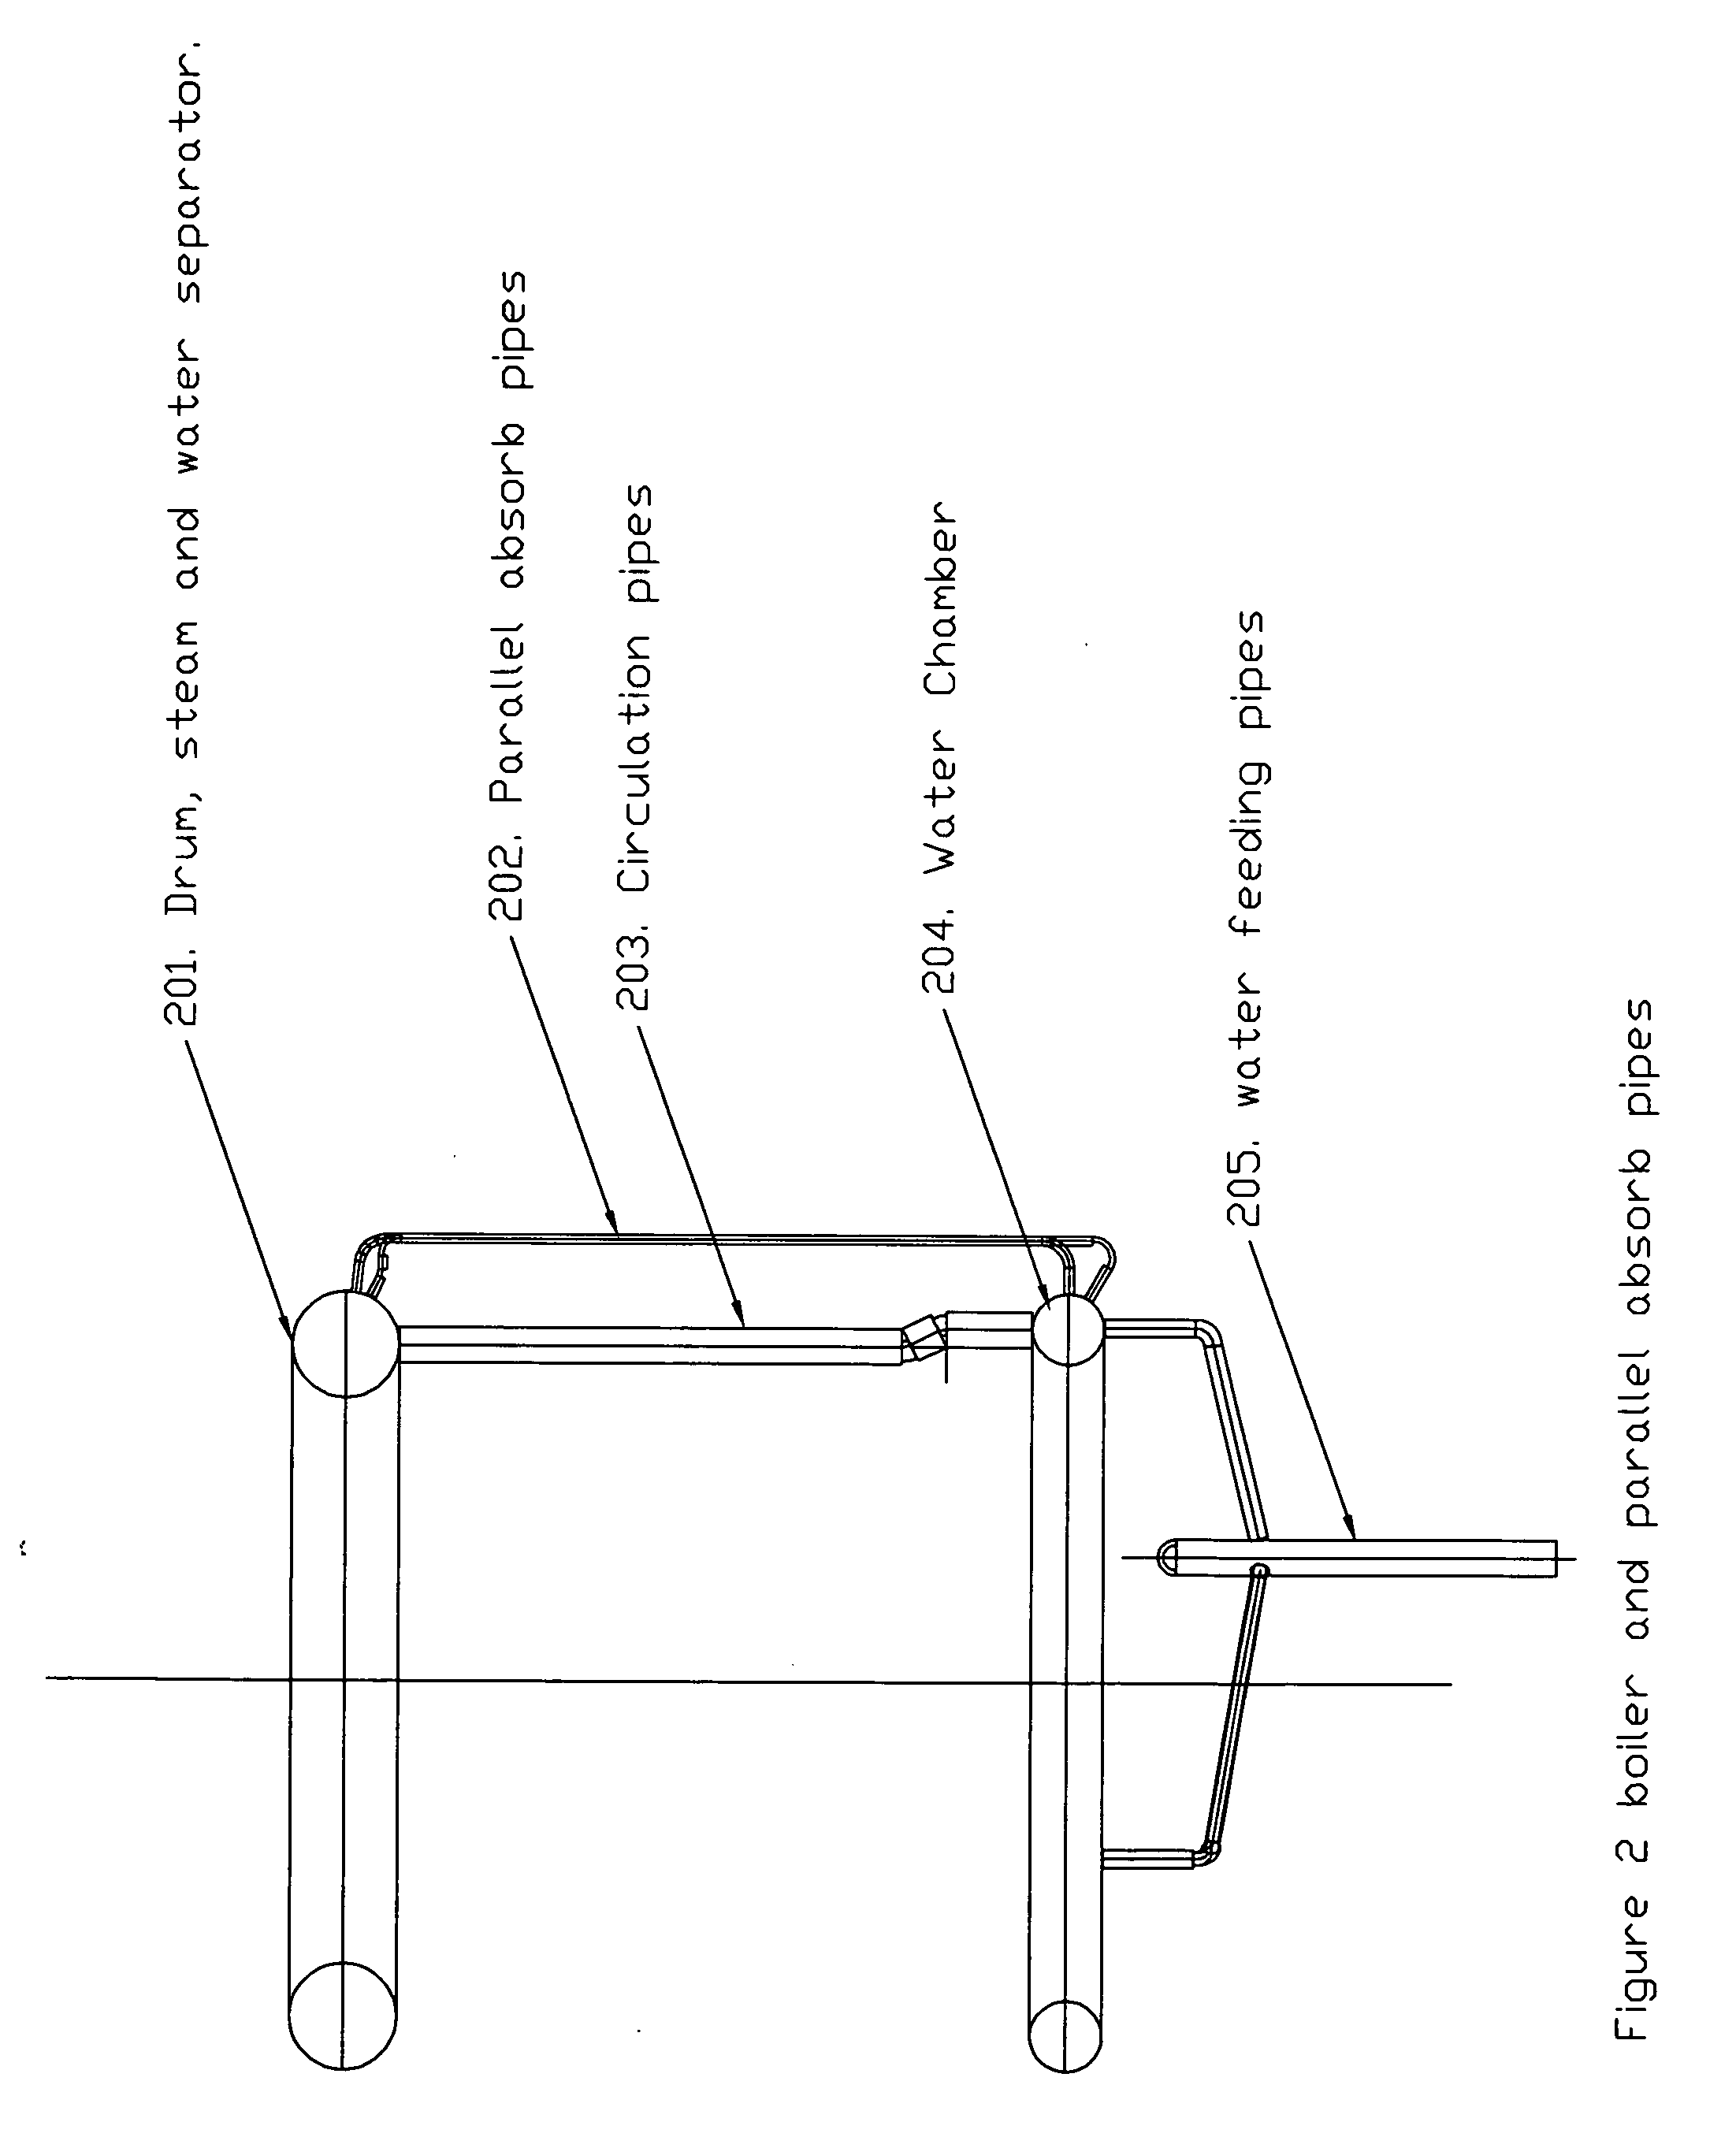 Method and apparatus of solar central receiver with boiler and super-heater